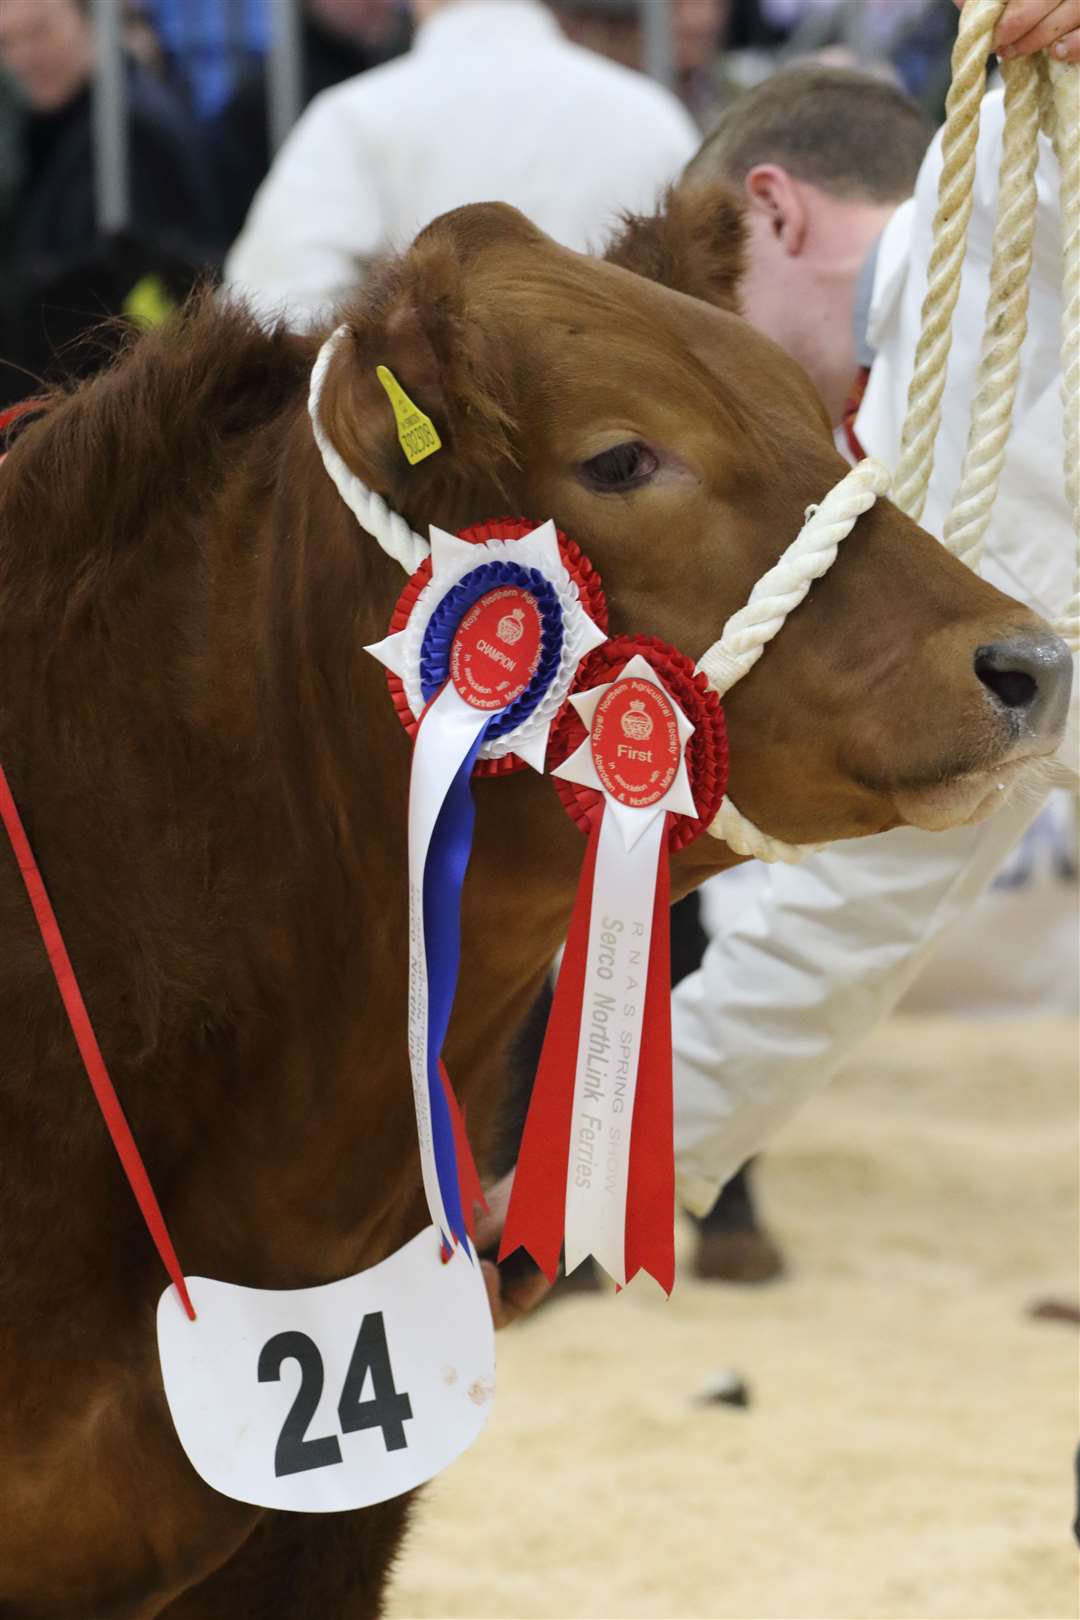 Overall Champion was awarded to a April 2022 born Limousin Cross Bullock from A& J Gammie, Drumforber, Laurencekirk. Picture: David Porter